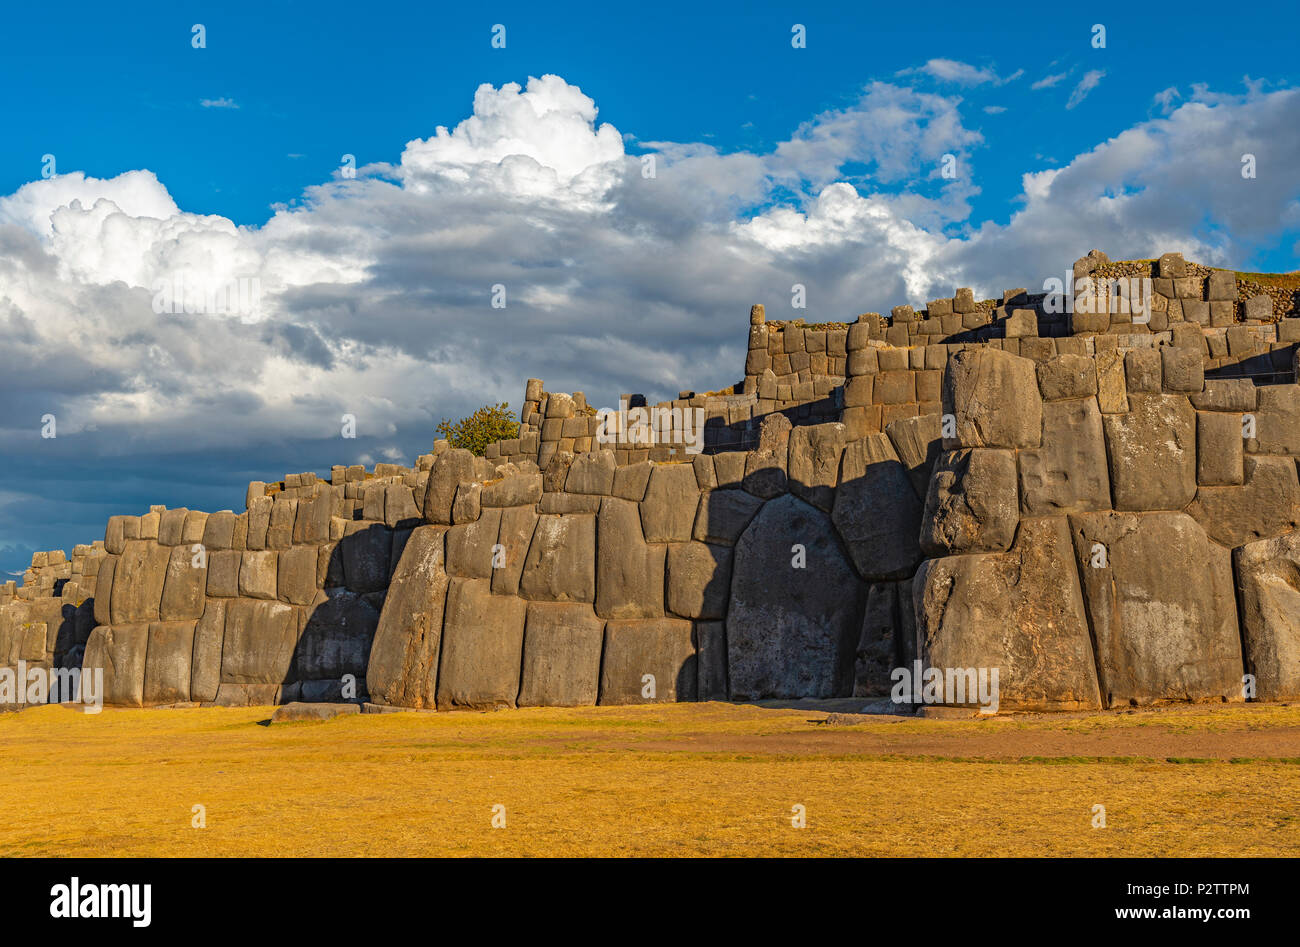 The Inca fortress of Sacsayhuaman at sunset right outside the city of Cusco in the Andes mountain range of Peru, South America. Stock Photo